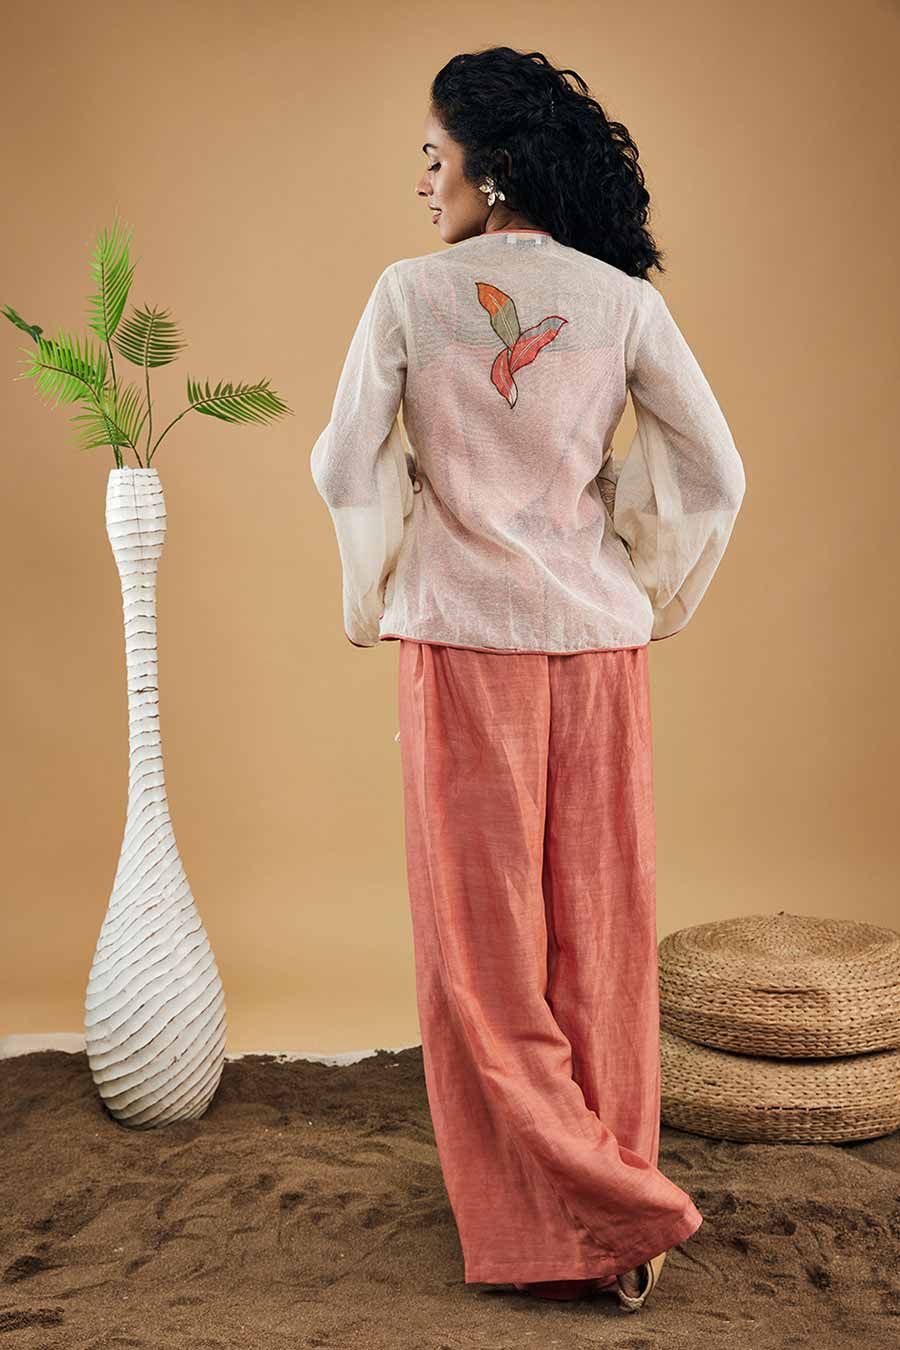 Off-White & Peach Conversational Patchwork Top And Pants